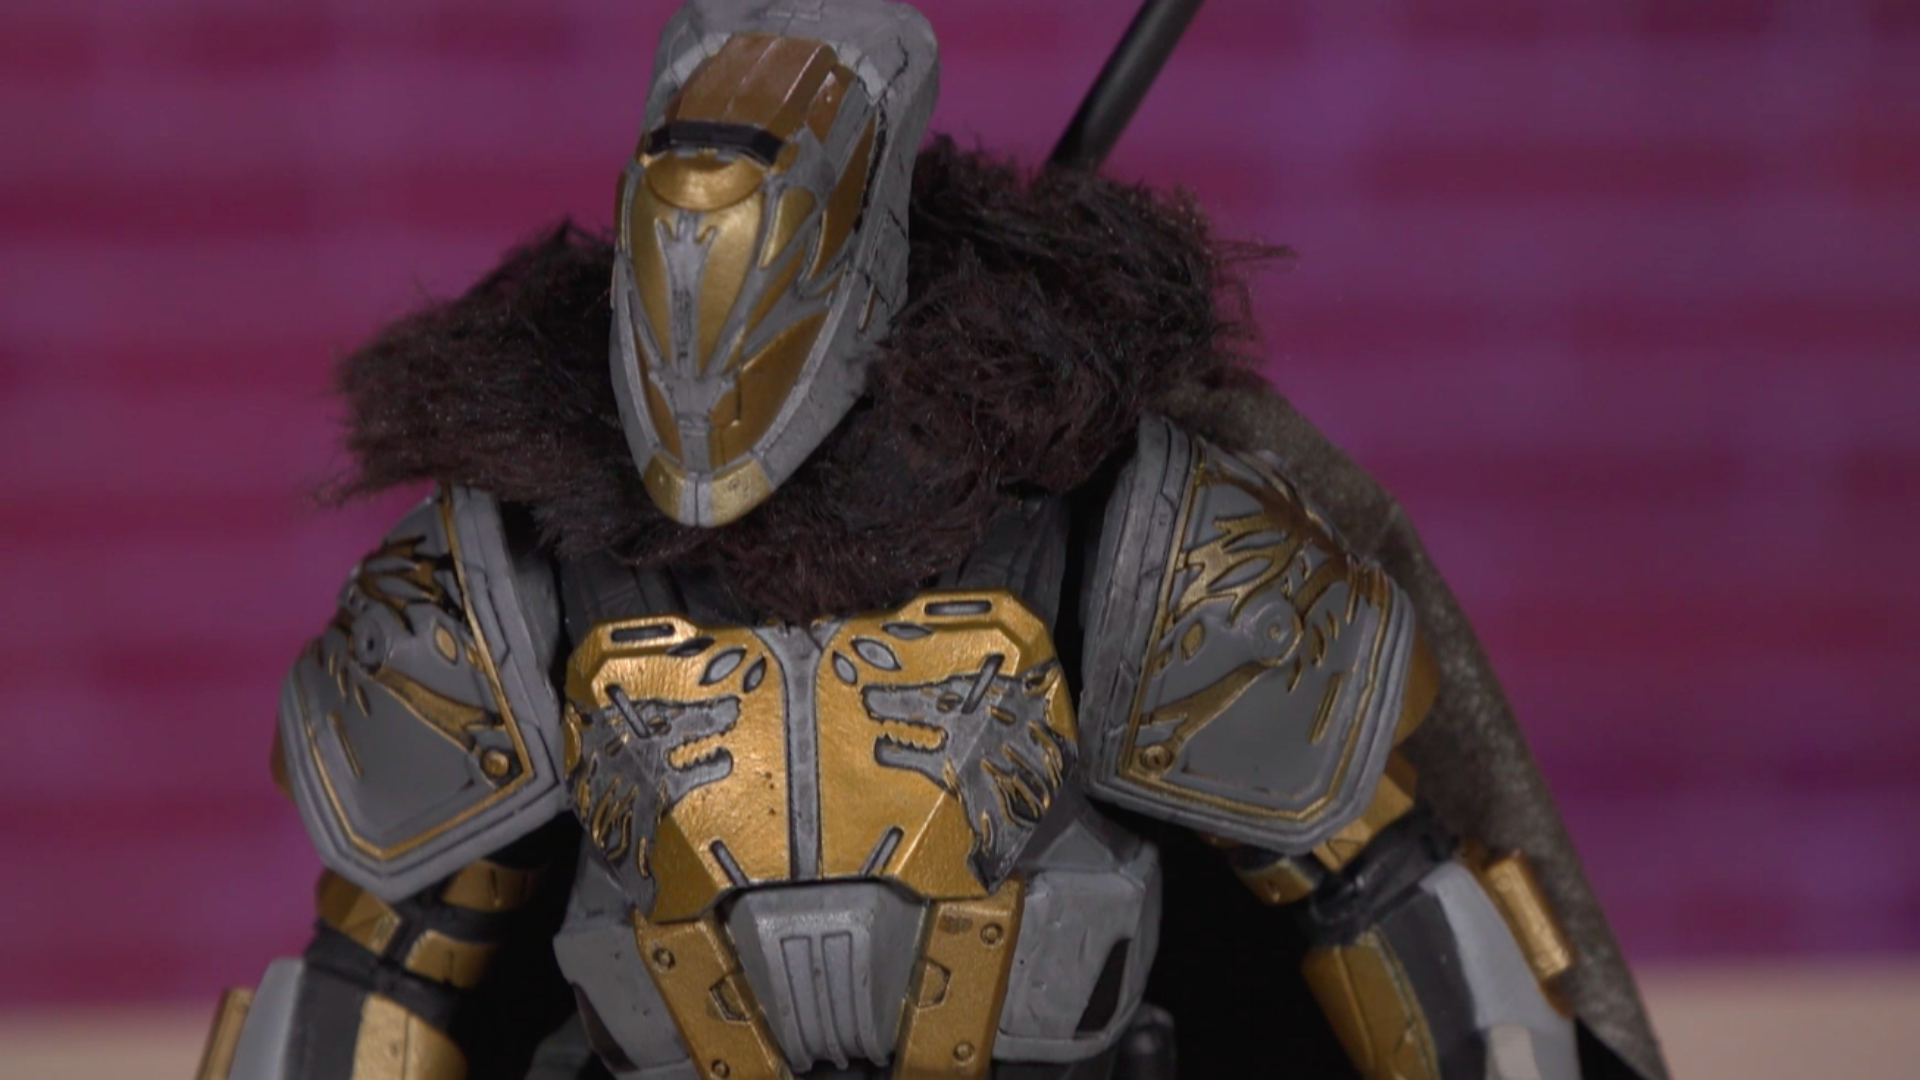 This Destiny Lord Saladin Figure is Crazy Detailed